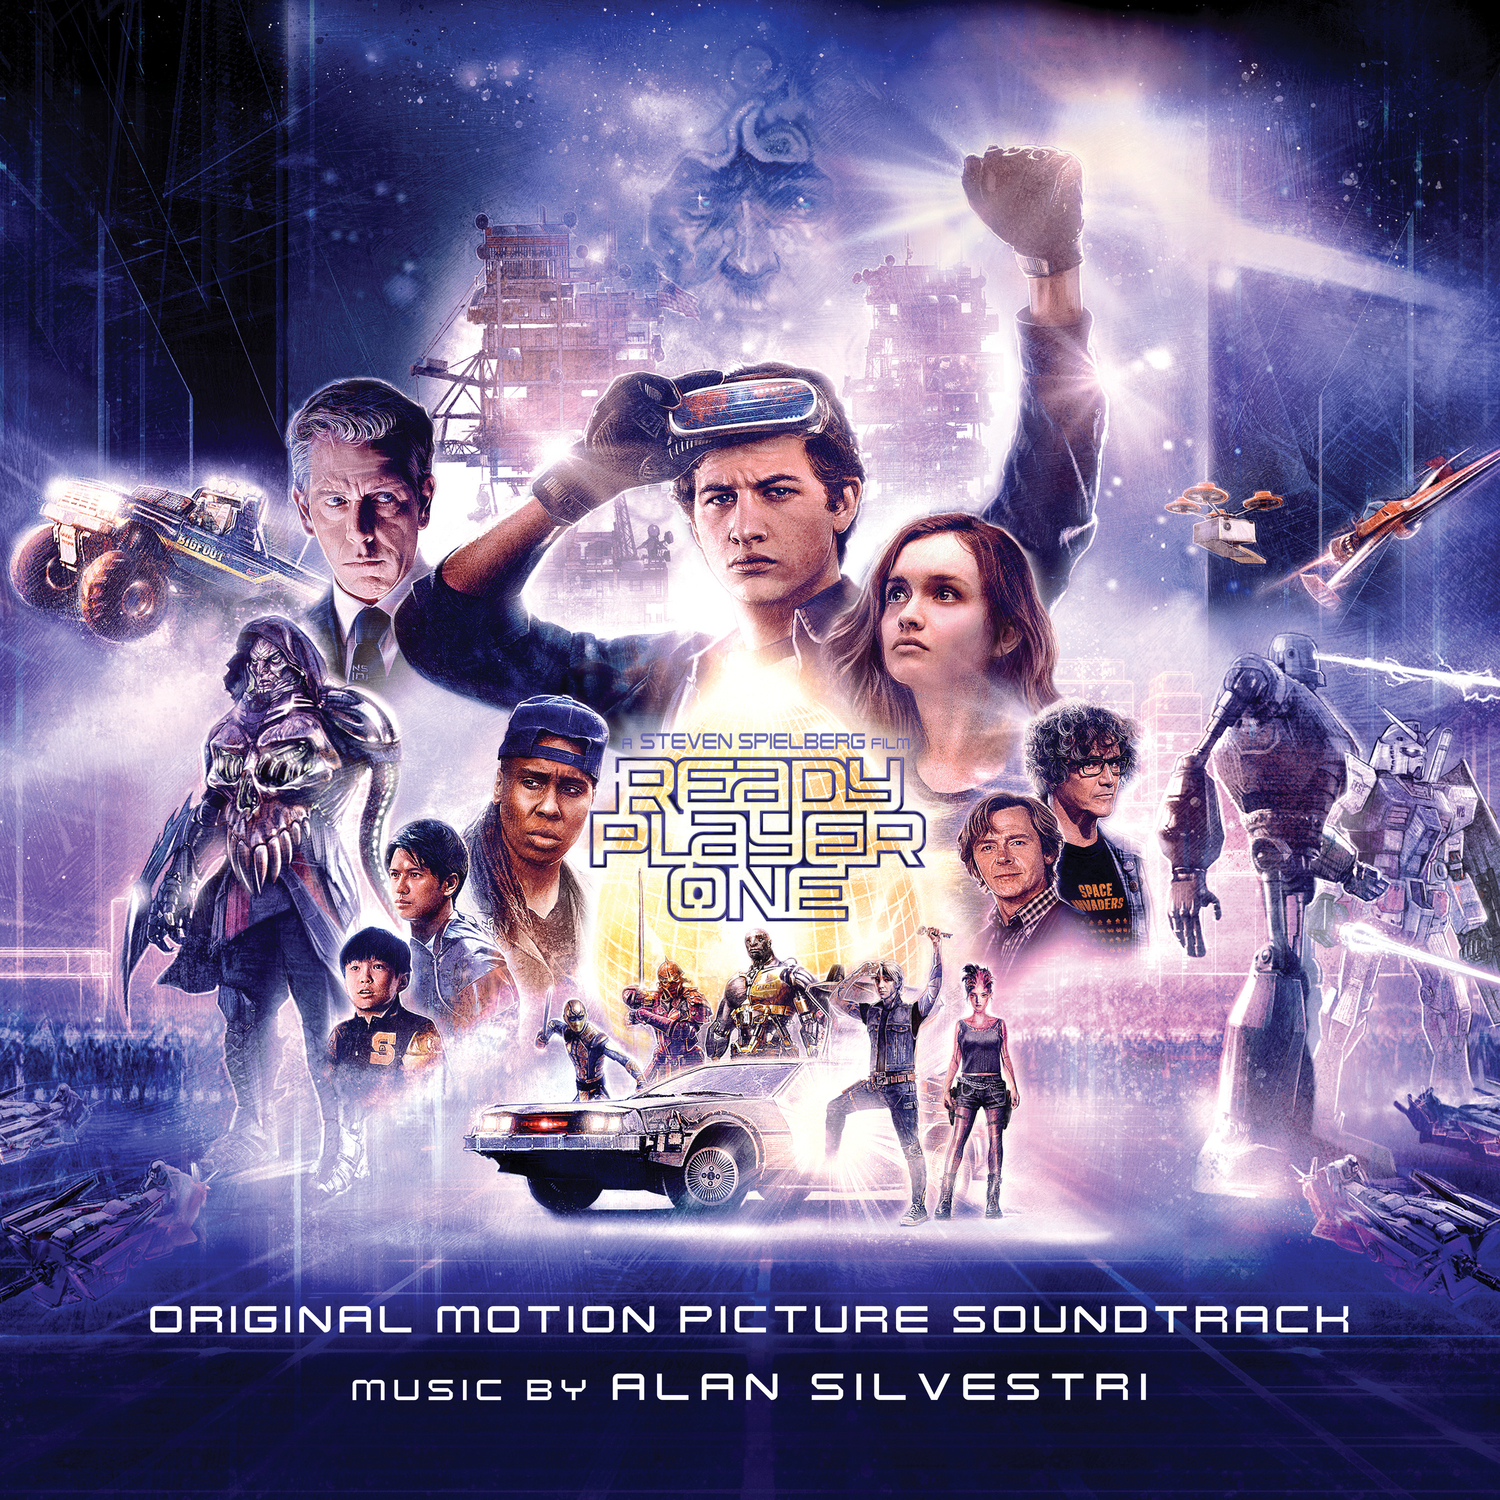 Release “Ready Player One” by Alan Silvestri - Cover Art - MusicBrainz